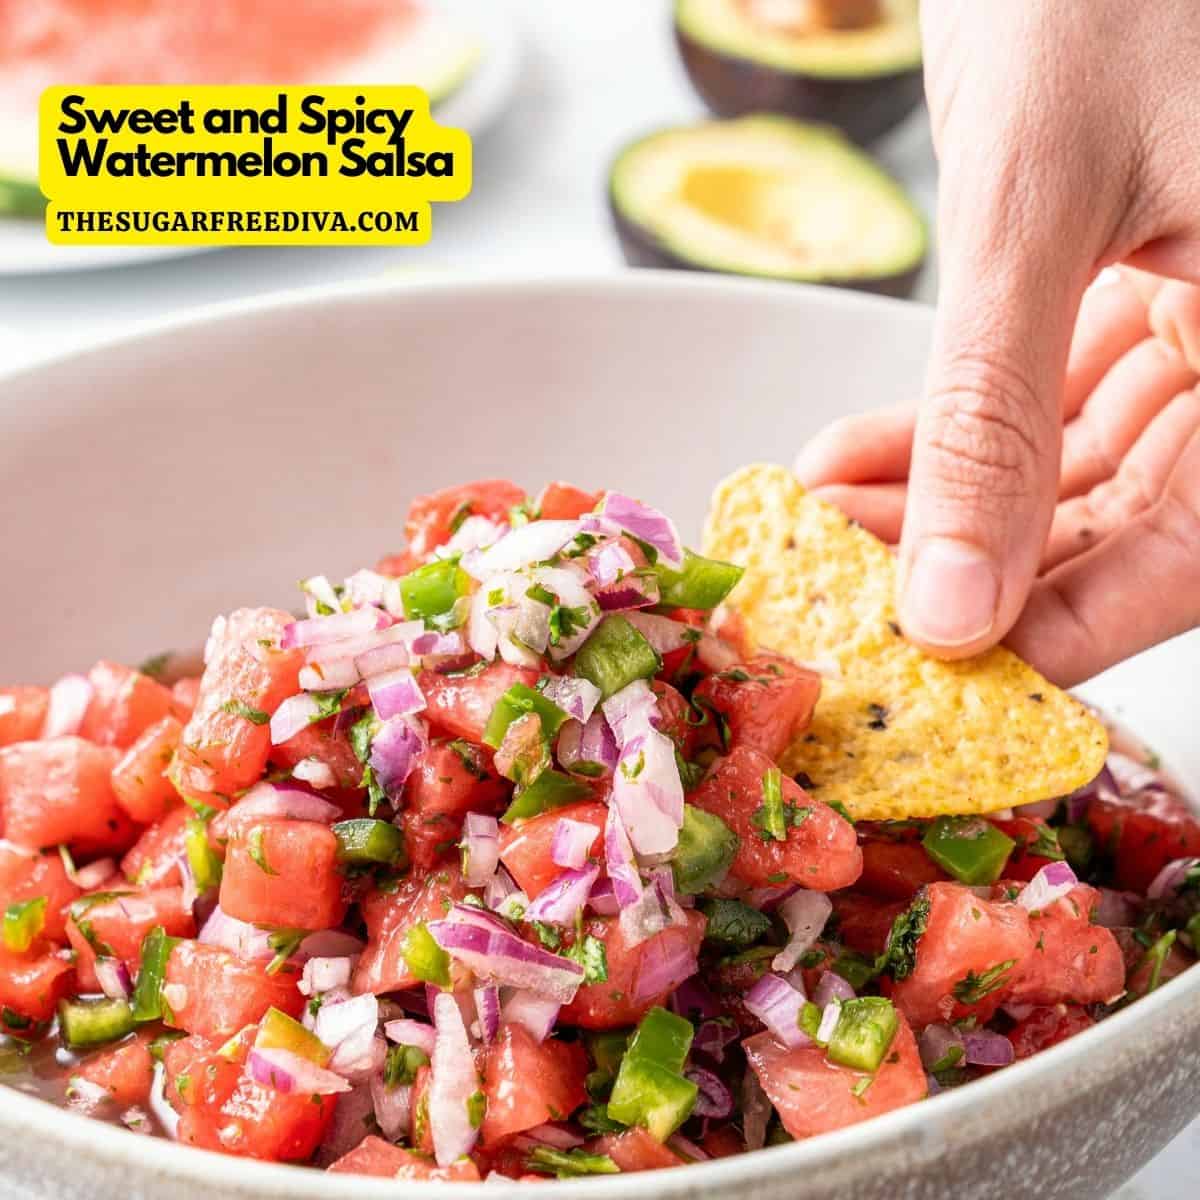 Sweet and Spicy Watermelon Salsa, a simple and delicious recipe made with fresh watermelon and with a hint of jalapeno.